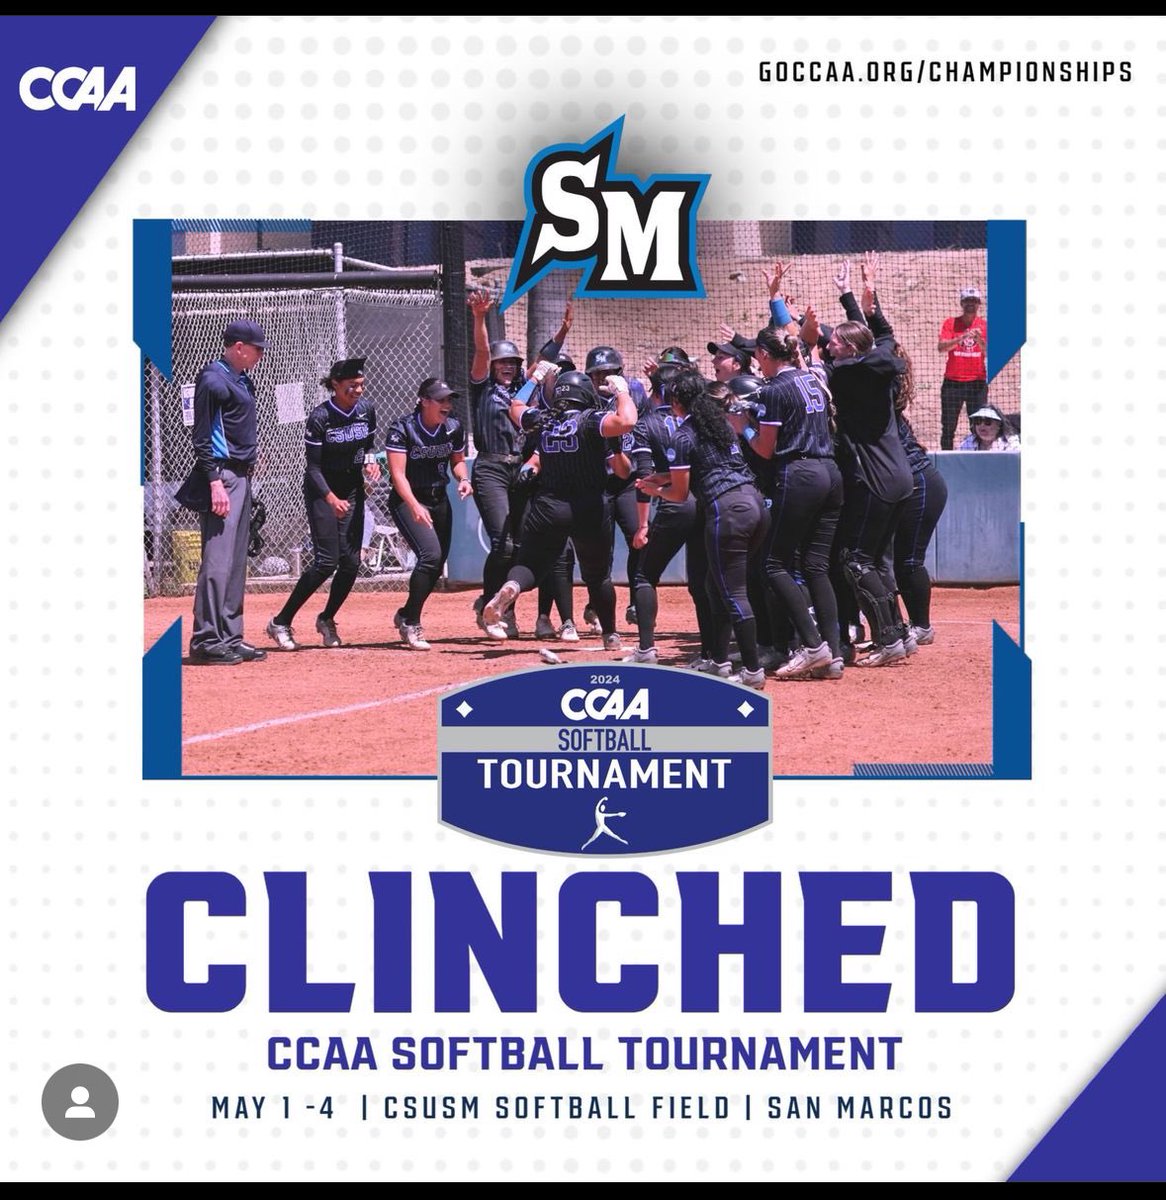 See you at the CCAA Tournament!